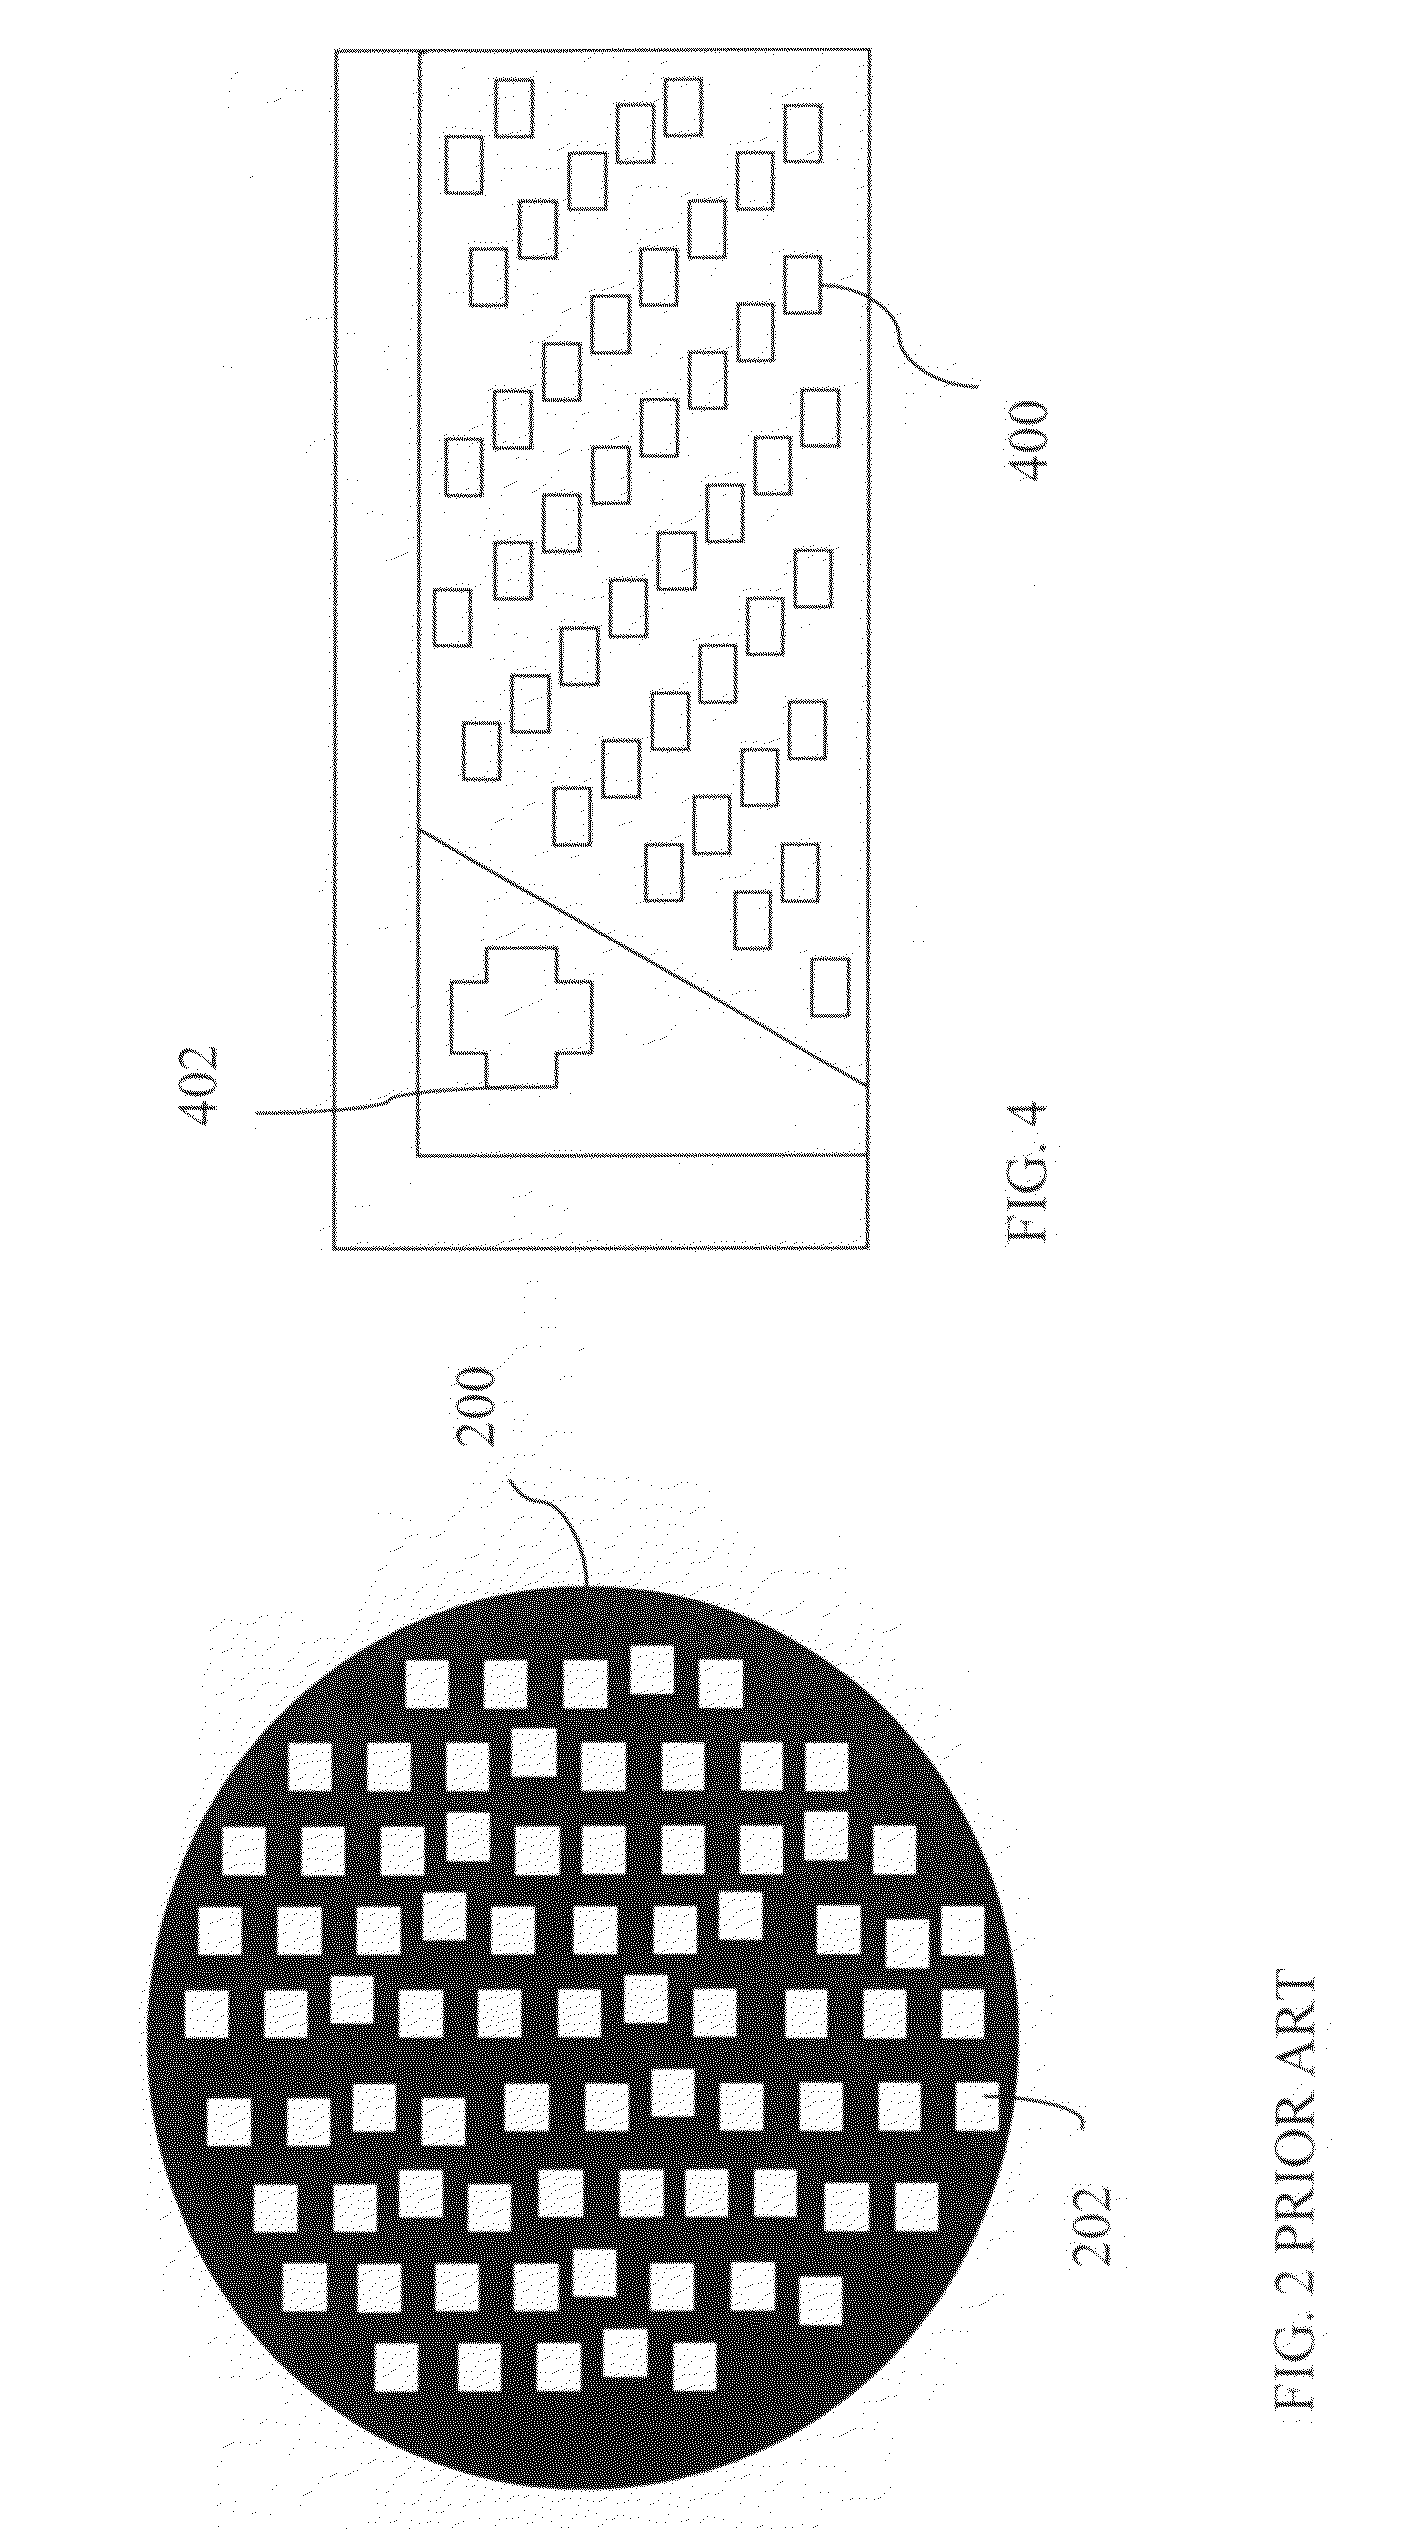 Method and apparatus for performing pattern alignment to plurality of dies